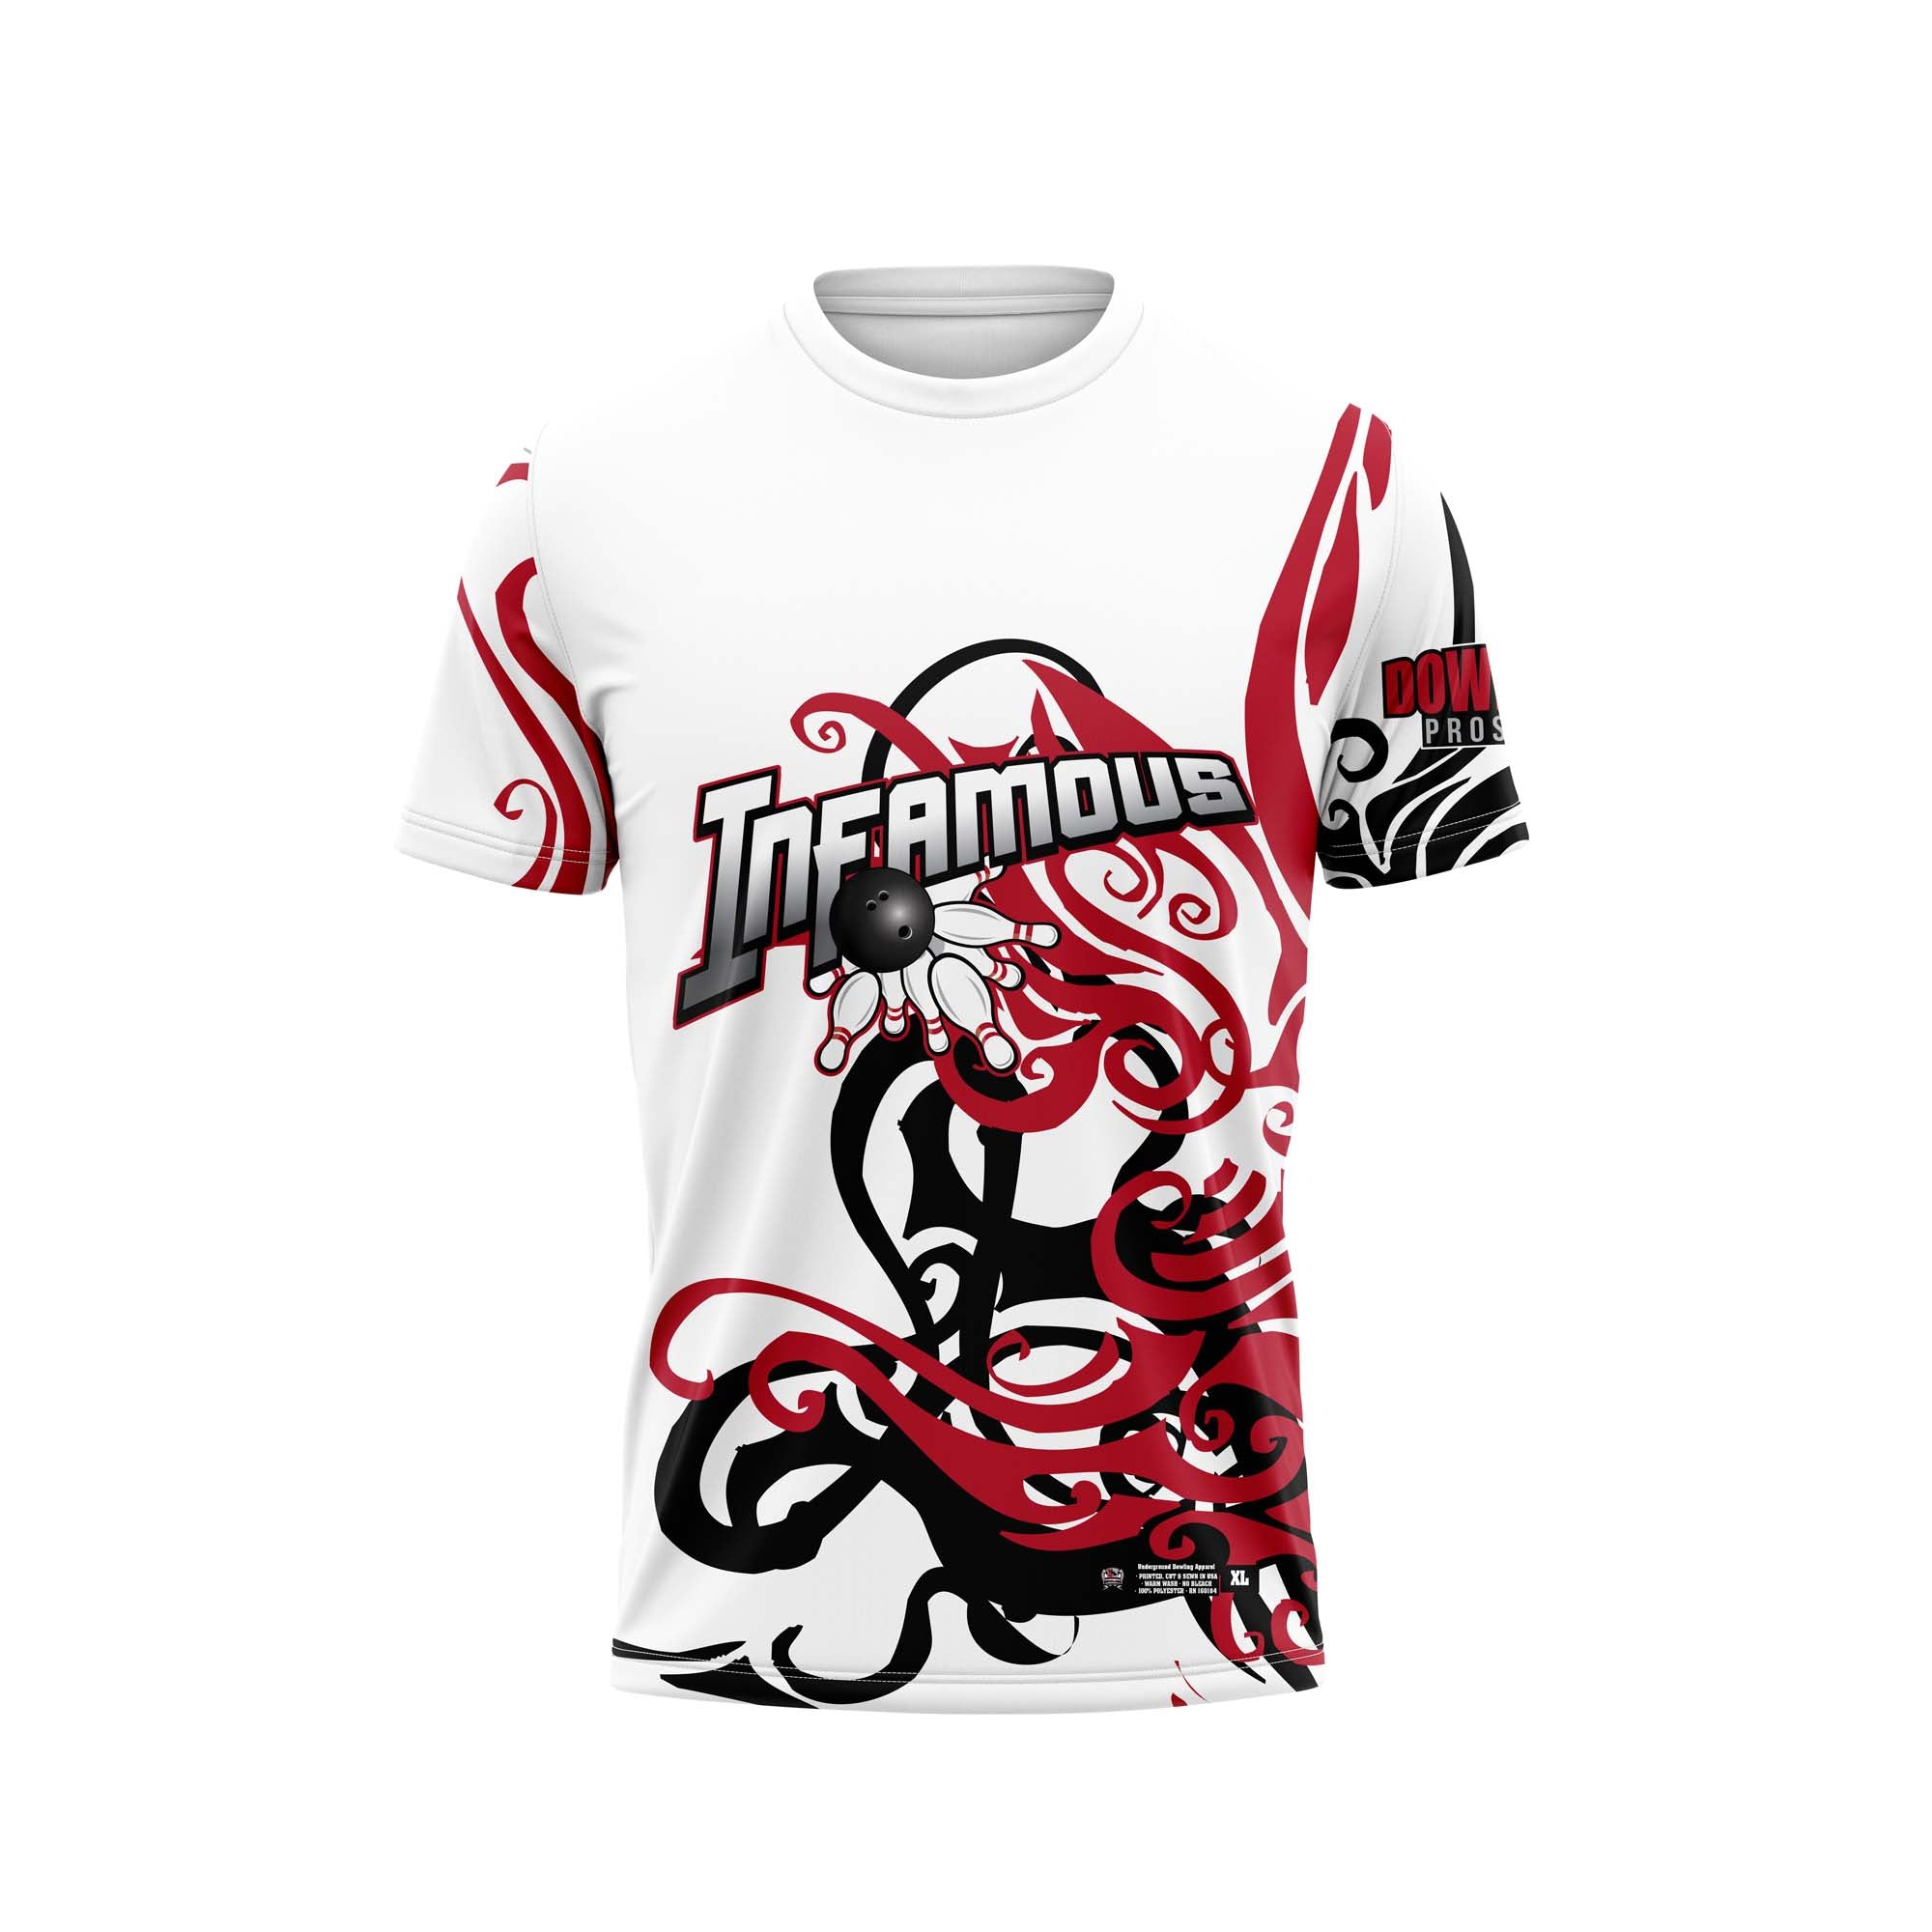 Infamous Tribal White Jersey